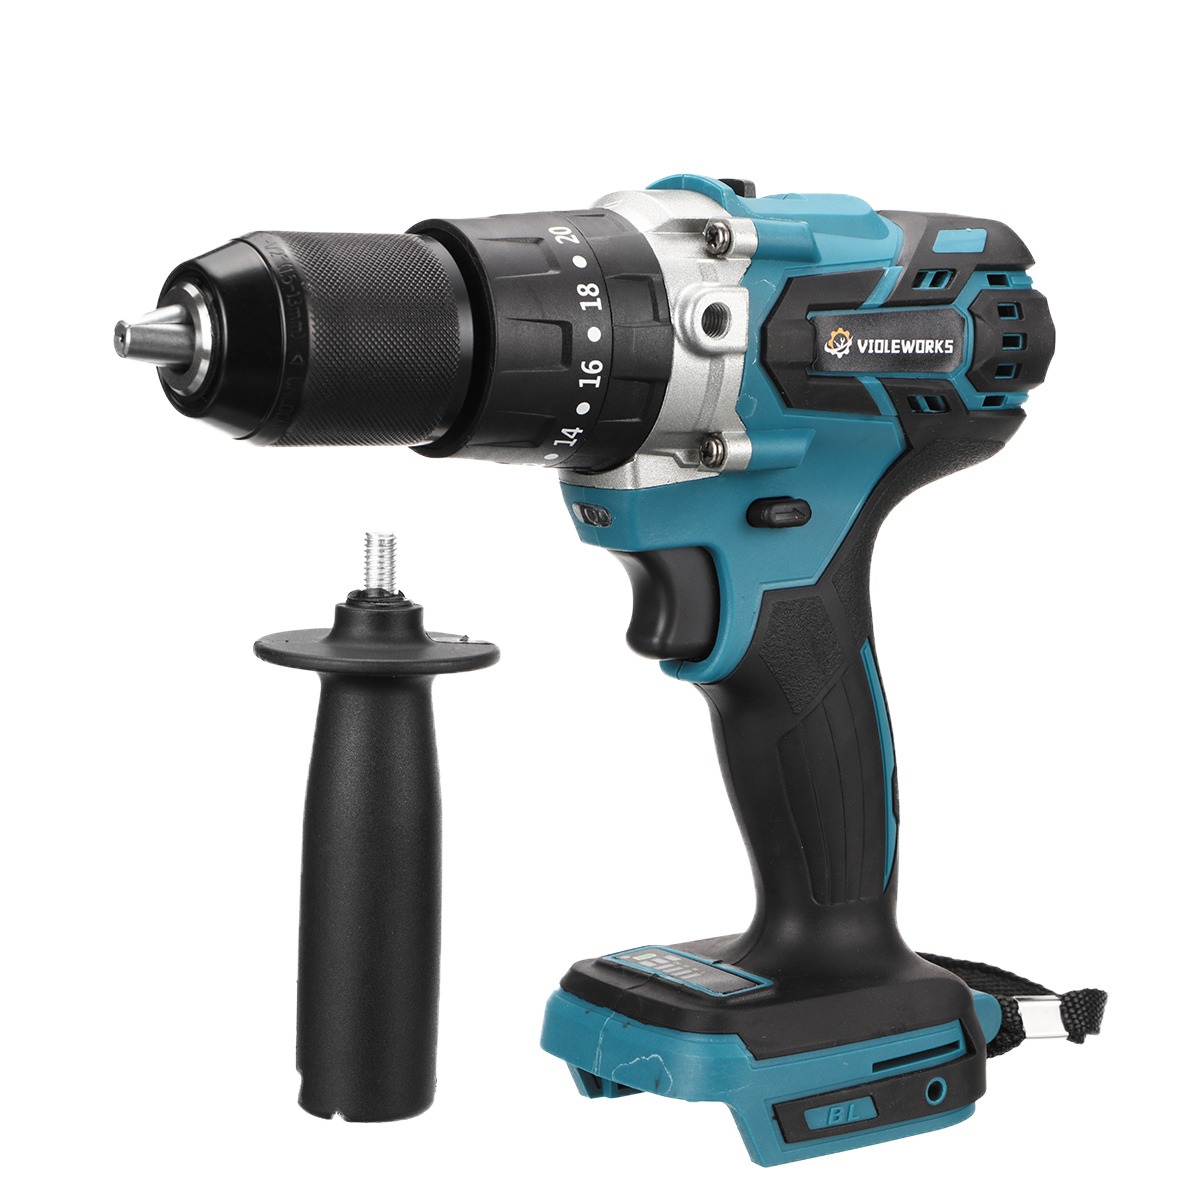 VIOLEWORKS-3-IN-1-288VF-Cordless-Brushless-Hammer-Drill-Speed-Regulated-Electric-Screwdriver-Impact--1852902-6